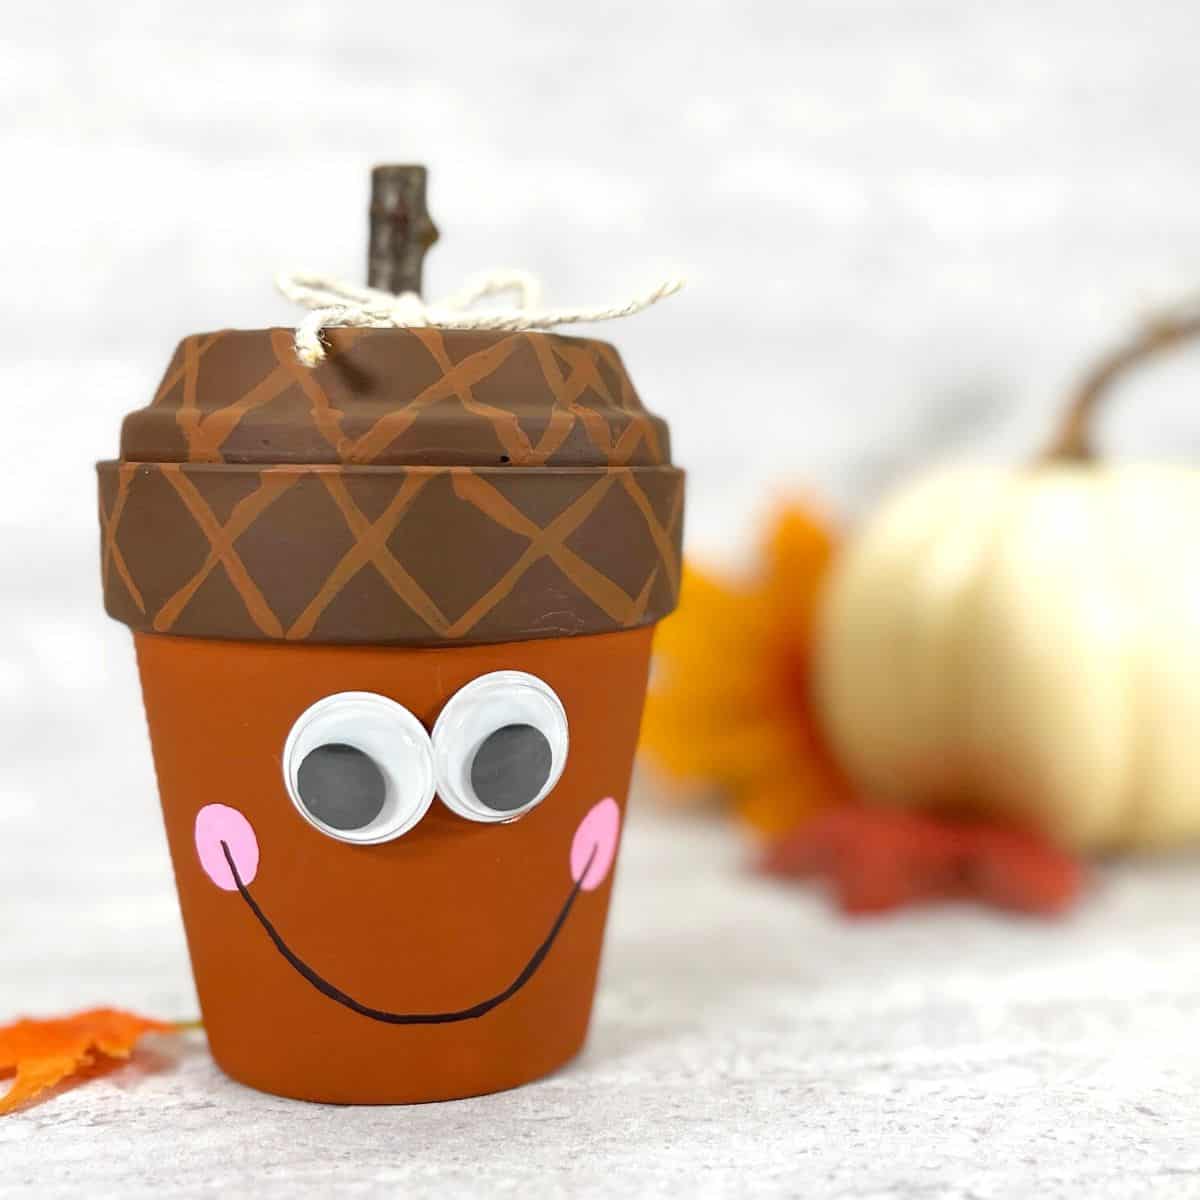 Clay Pot Acorn Craft DIY, an easy fall inspired do it yourself project made with dollar store materials, terracotta pot. Most ages 